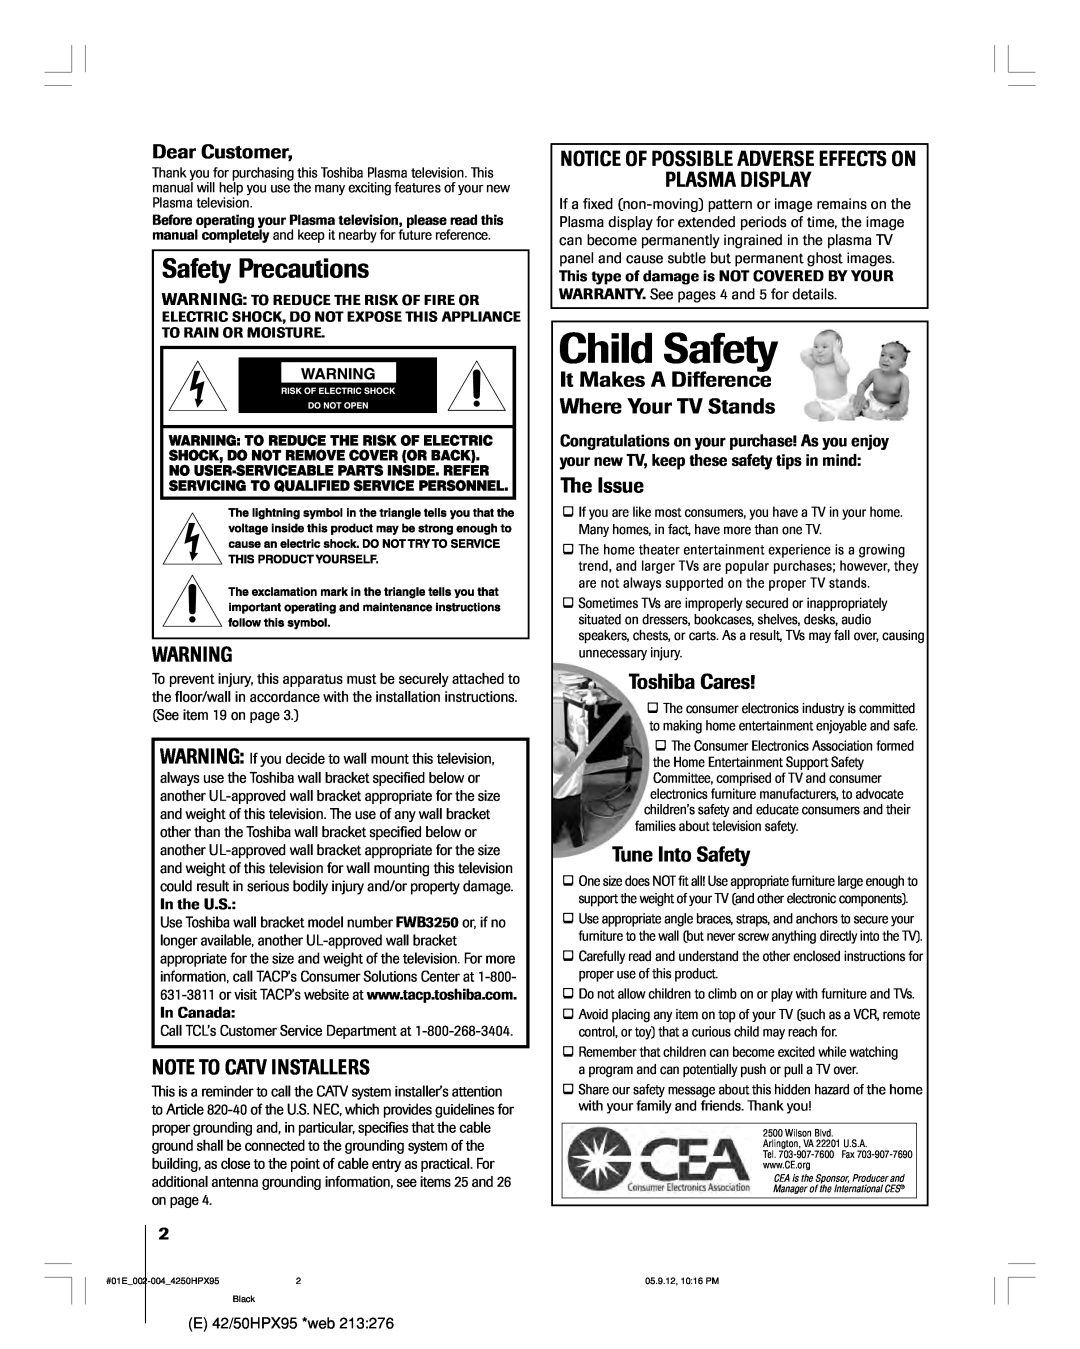 Toshiba 42HPX95 Safety Precautions, Note To Catv Installers, Notice Of Possible Adverse Effects On Plasma Display 